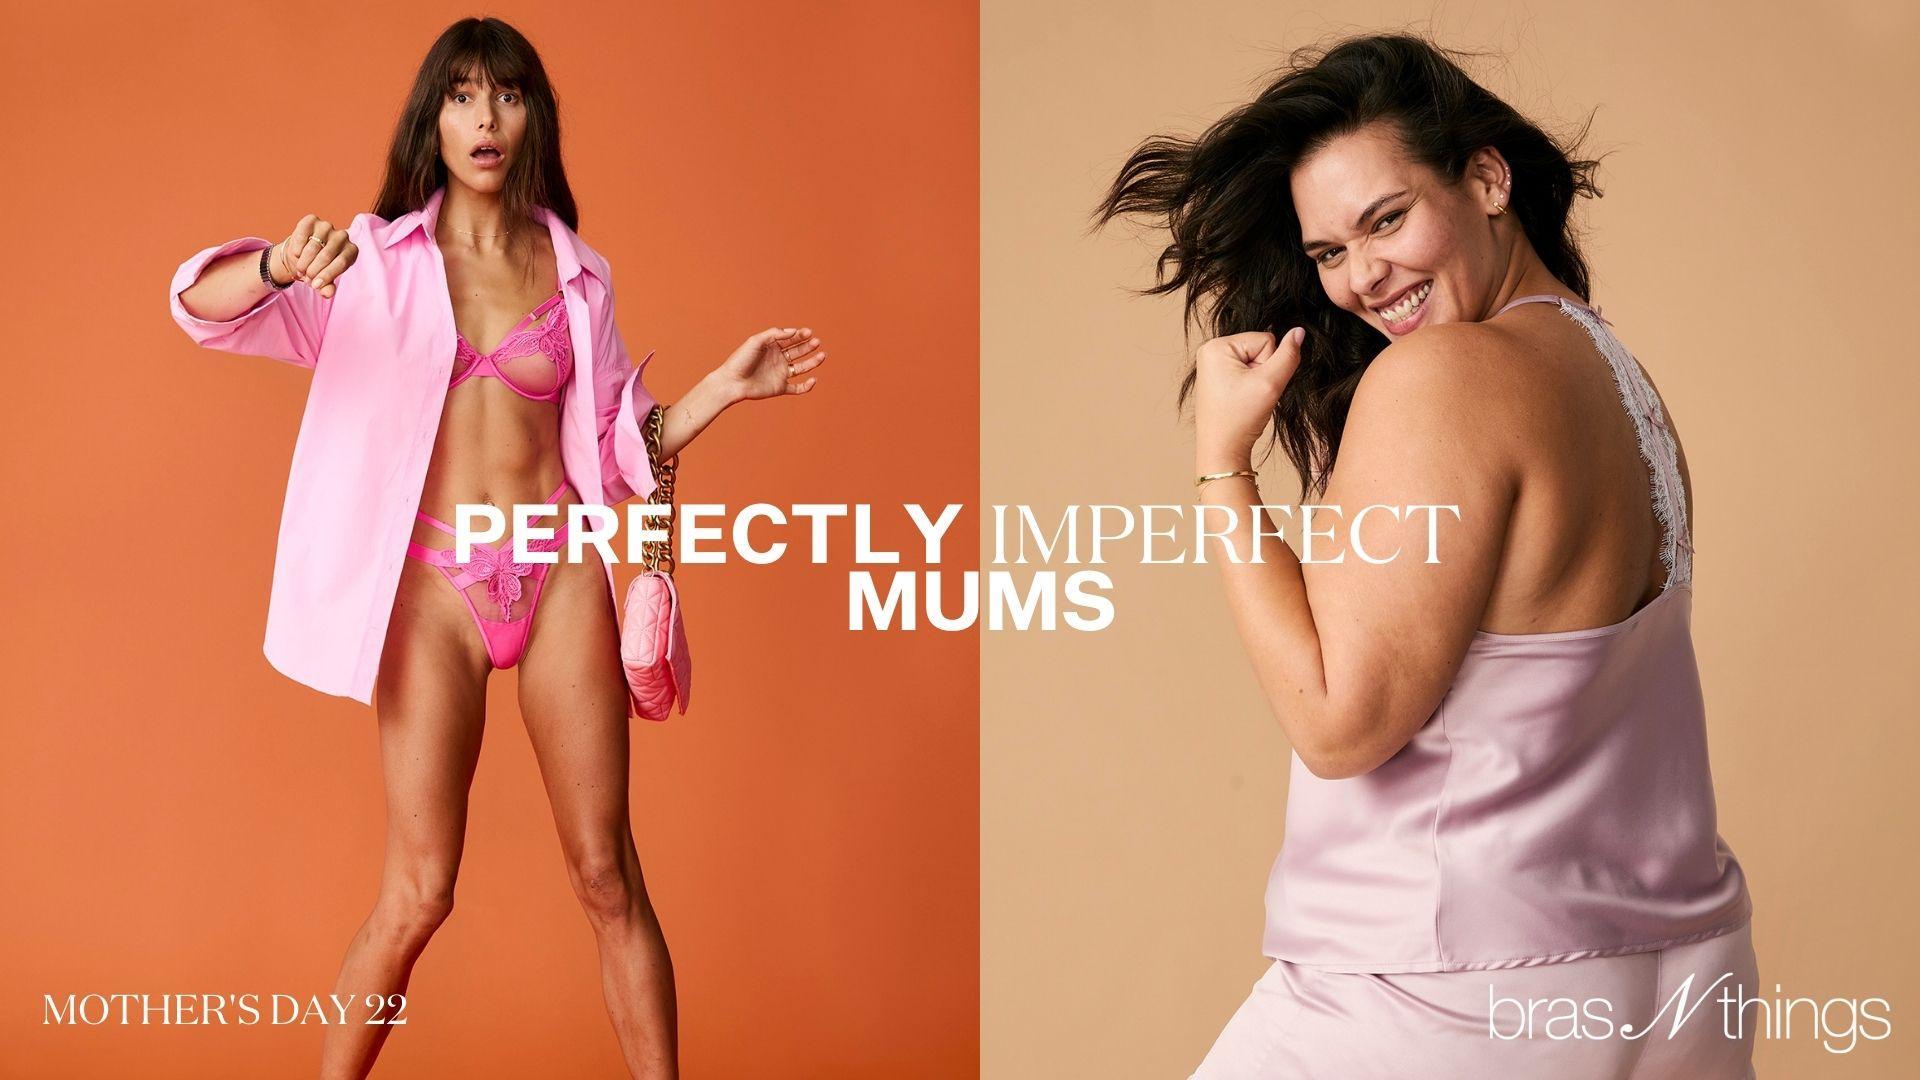 BNT x Mother's Day - Perfectly Imperfect Mums